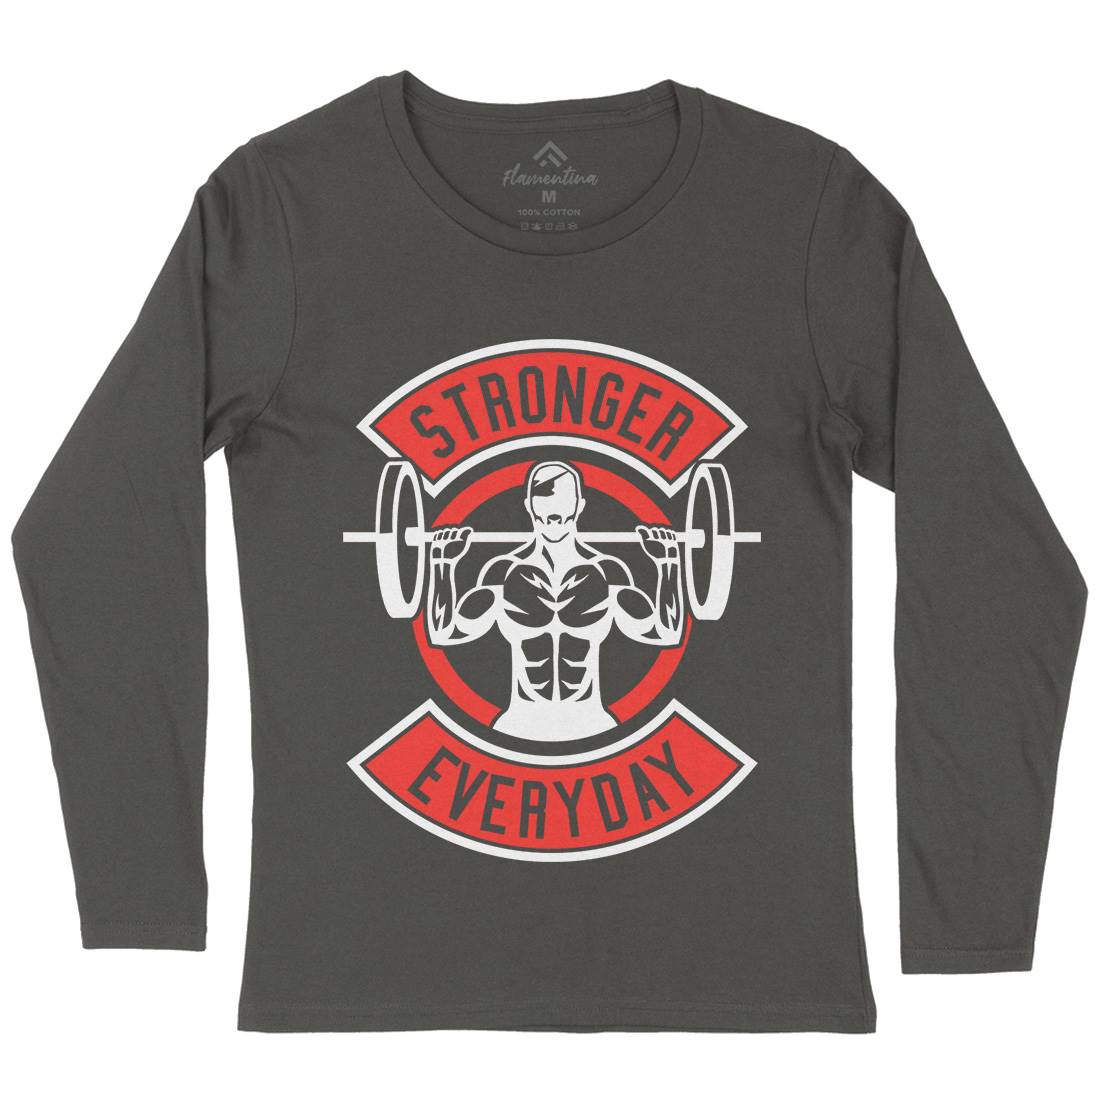 Stronger Everyday Womens Long Sleeve T-Shirt Gym A289